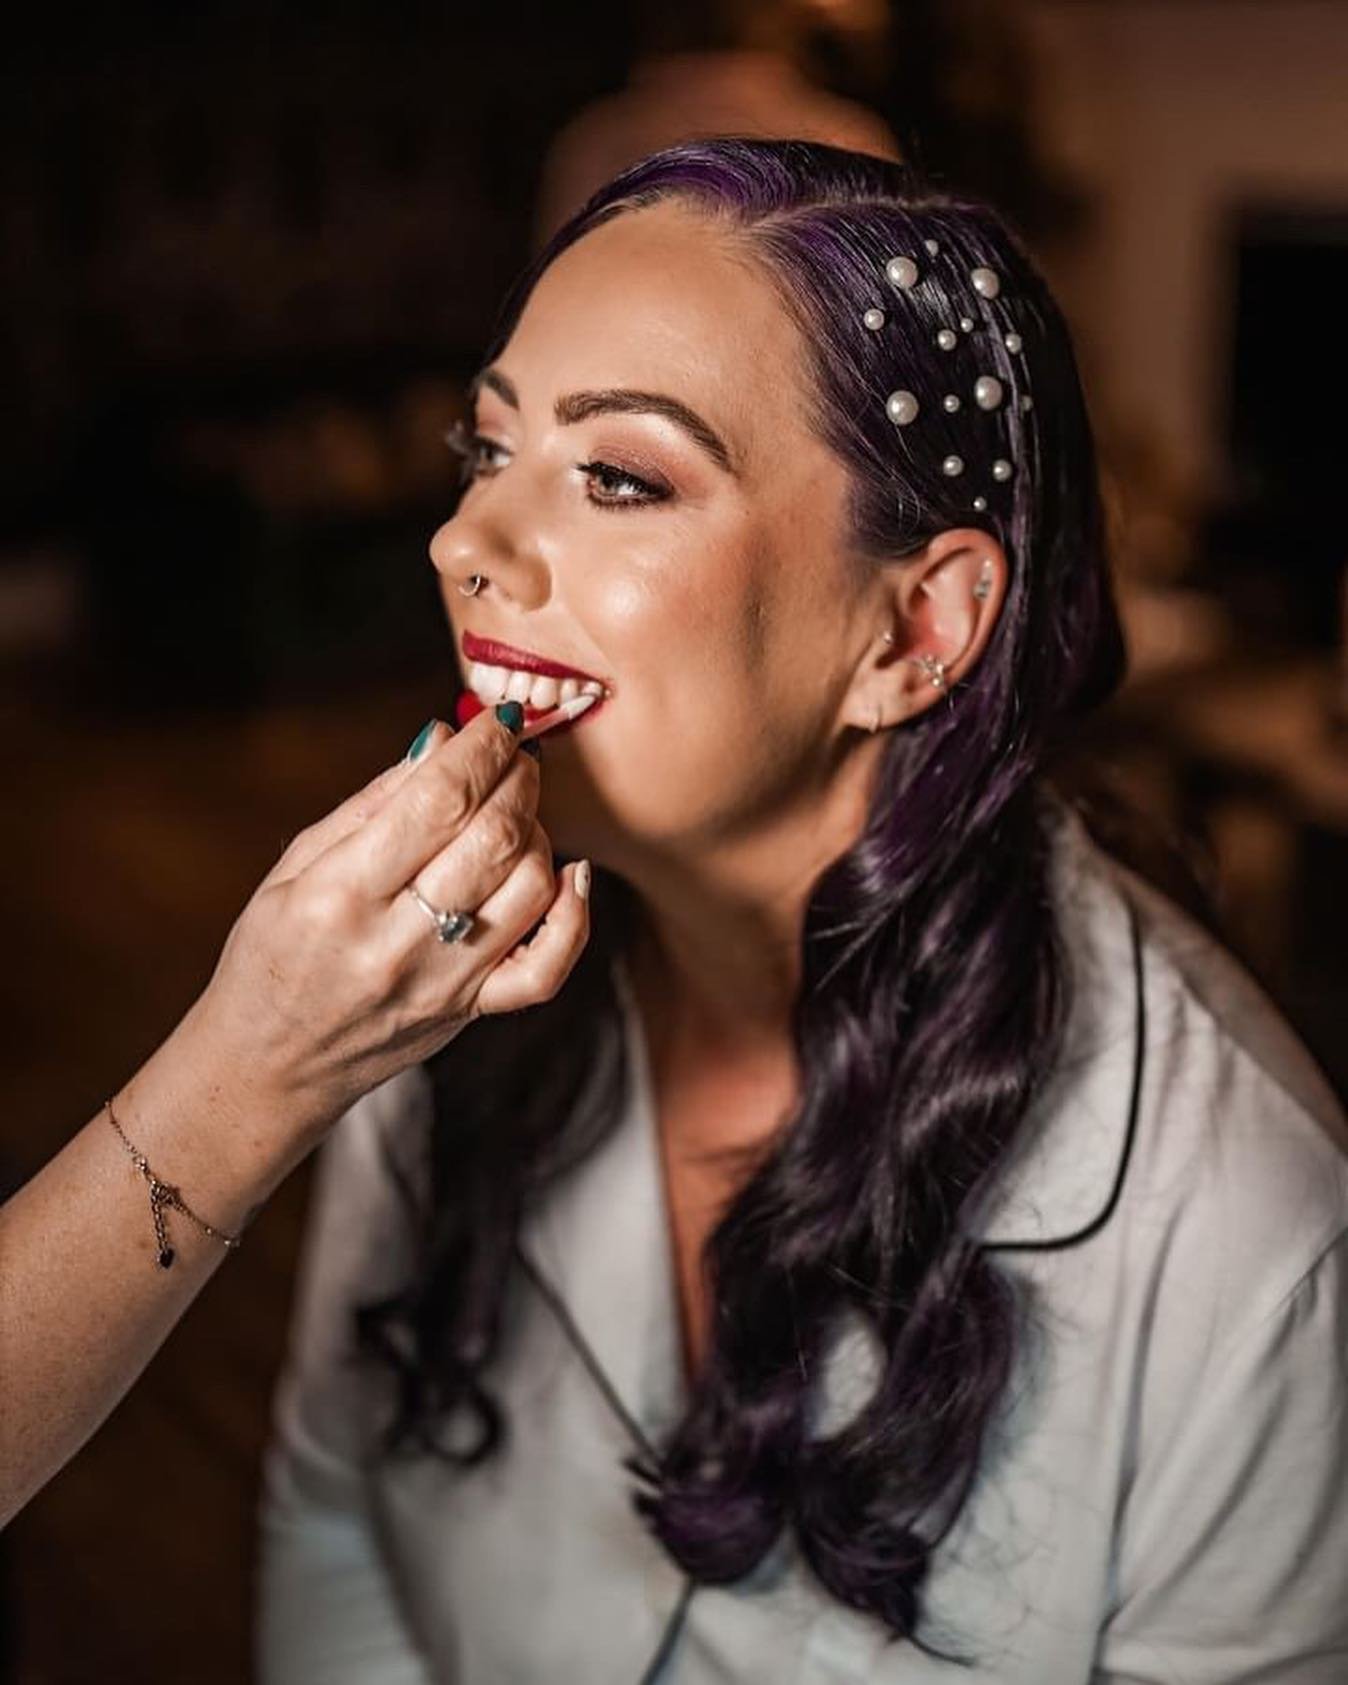 ✨Michelle✨

A colourful look for a gorgeous colourful lady!

Working with the amazing @meganneelyxo on hair.

Gorgeous photos by @tommyhamilton_photography 
Venue @theghilliedhu @therutlandhotel 

Key makeup -
@lisaeldridgemakeup Elevated Glow
@prima